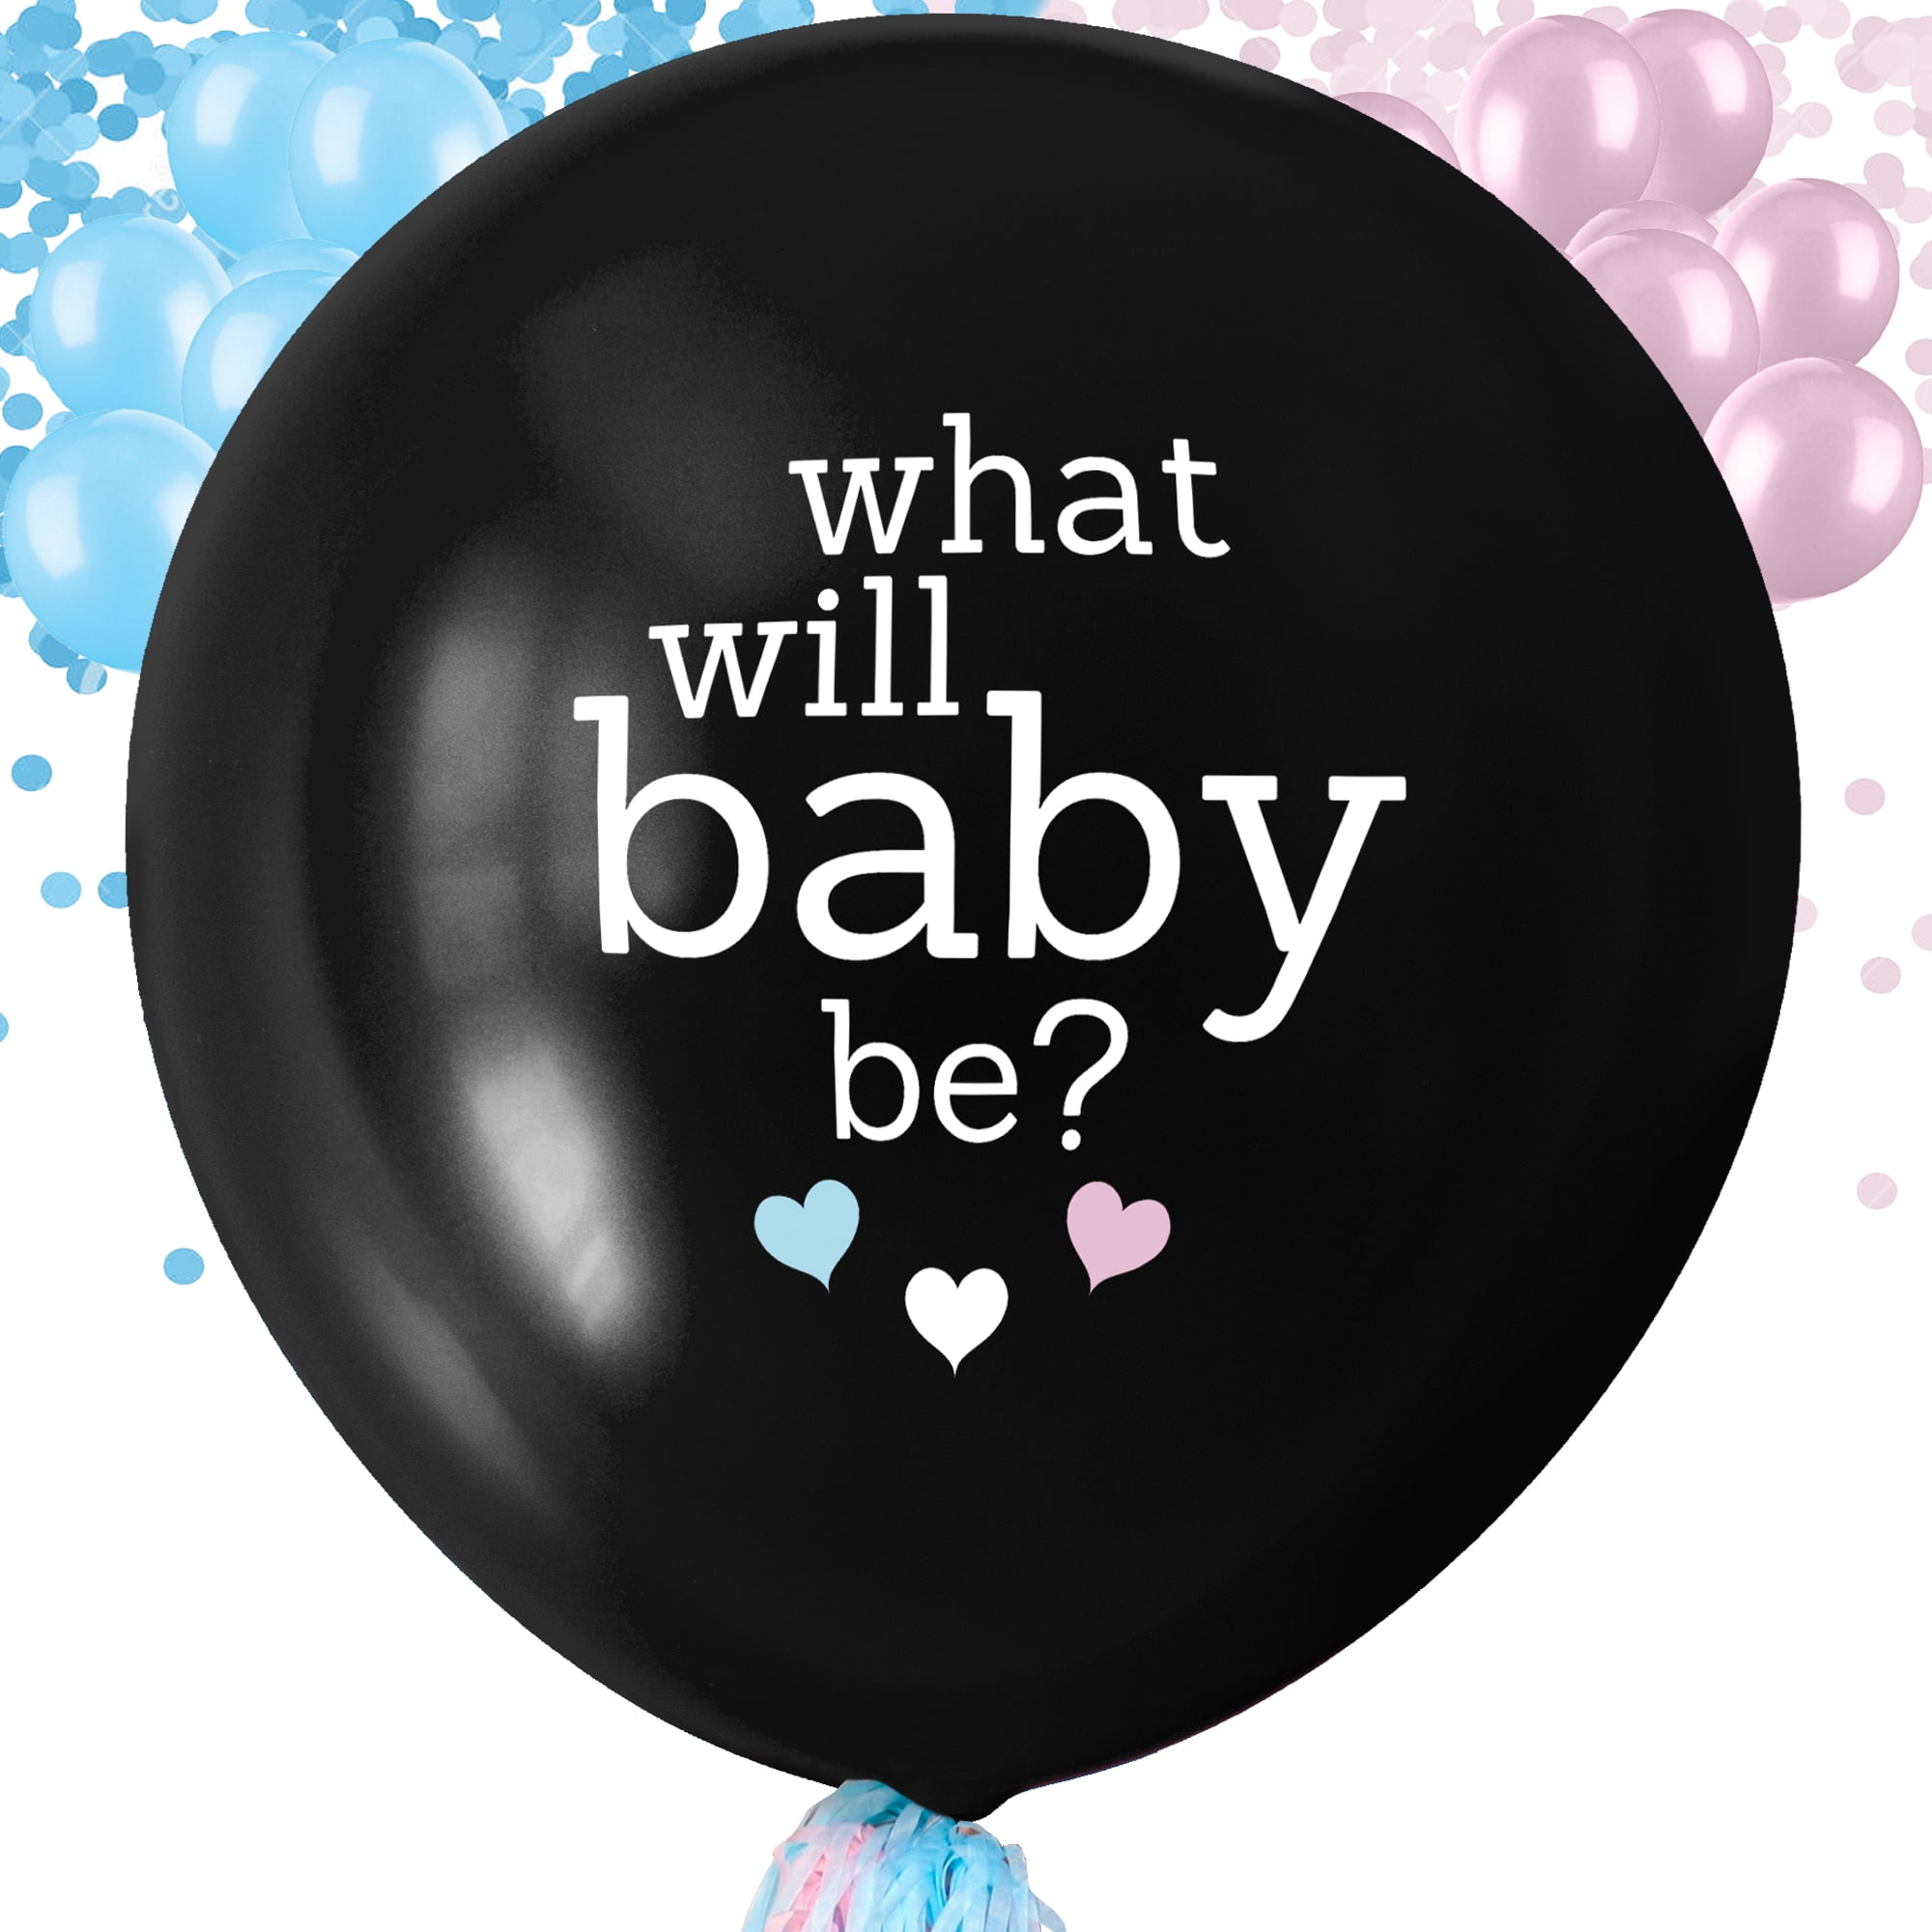 OH BABY Baby Shower Party Supplies Gender Reveal Confetti Balloons About to Pop 